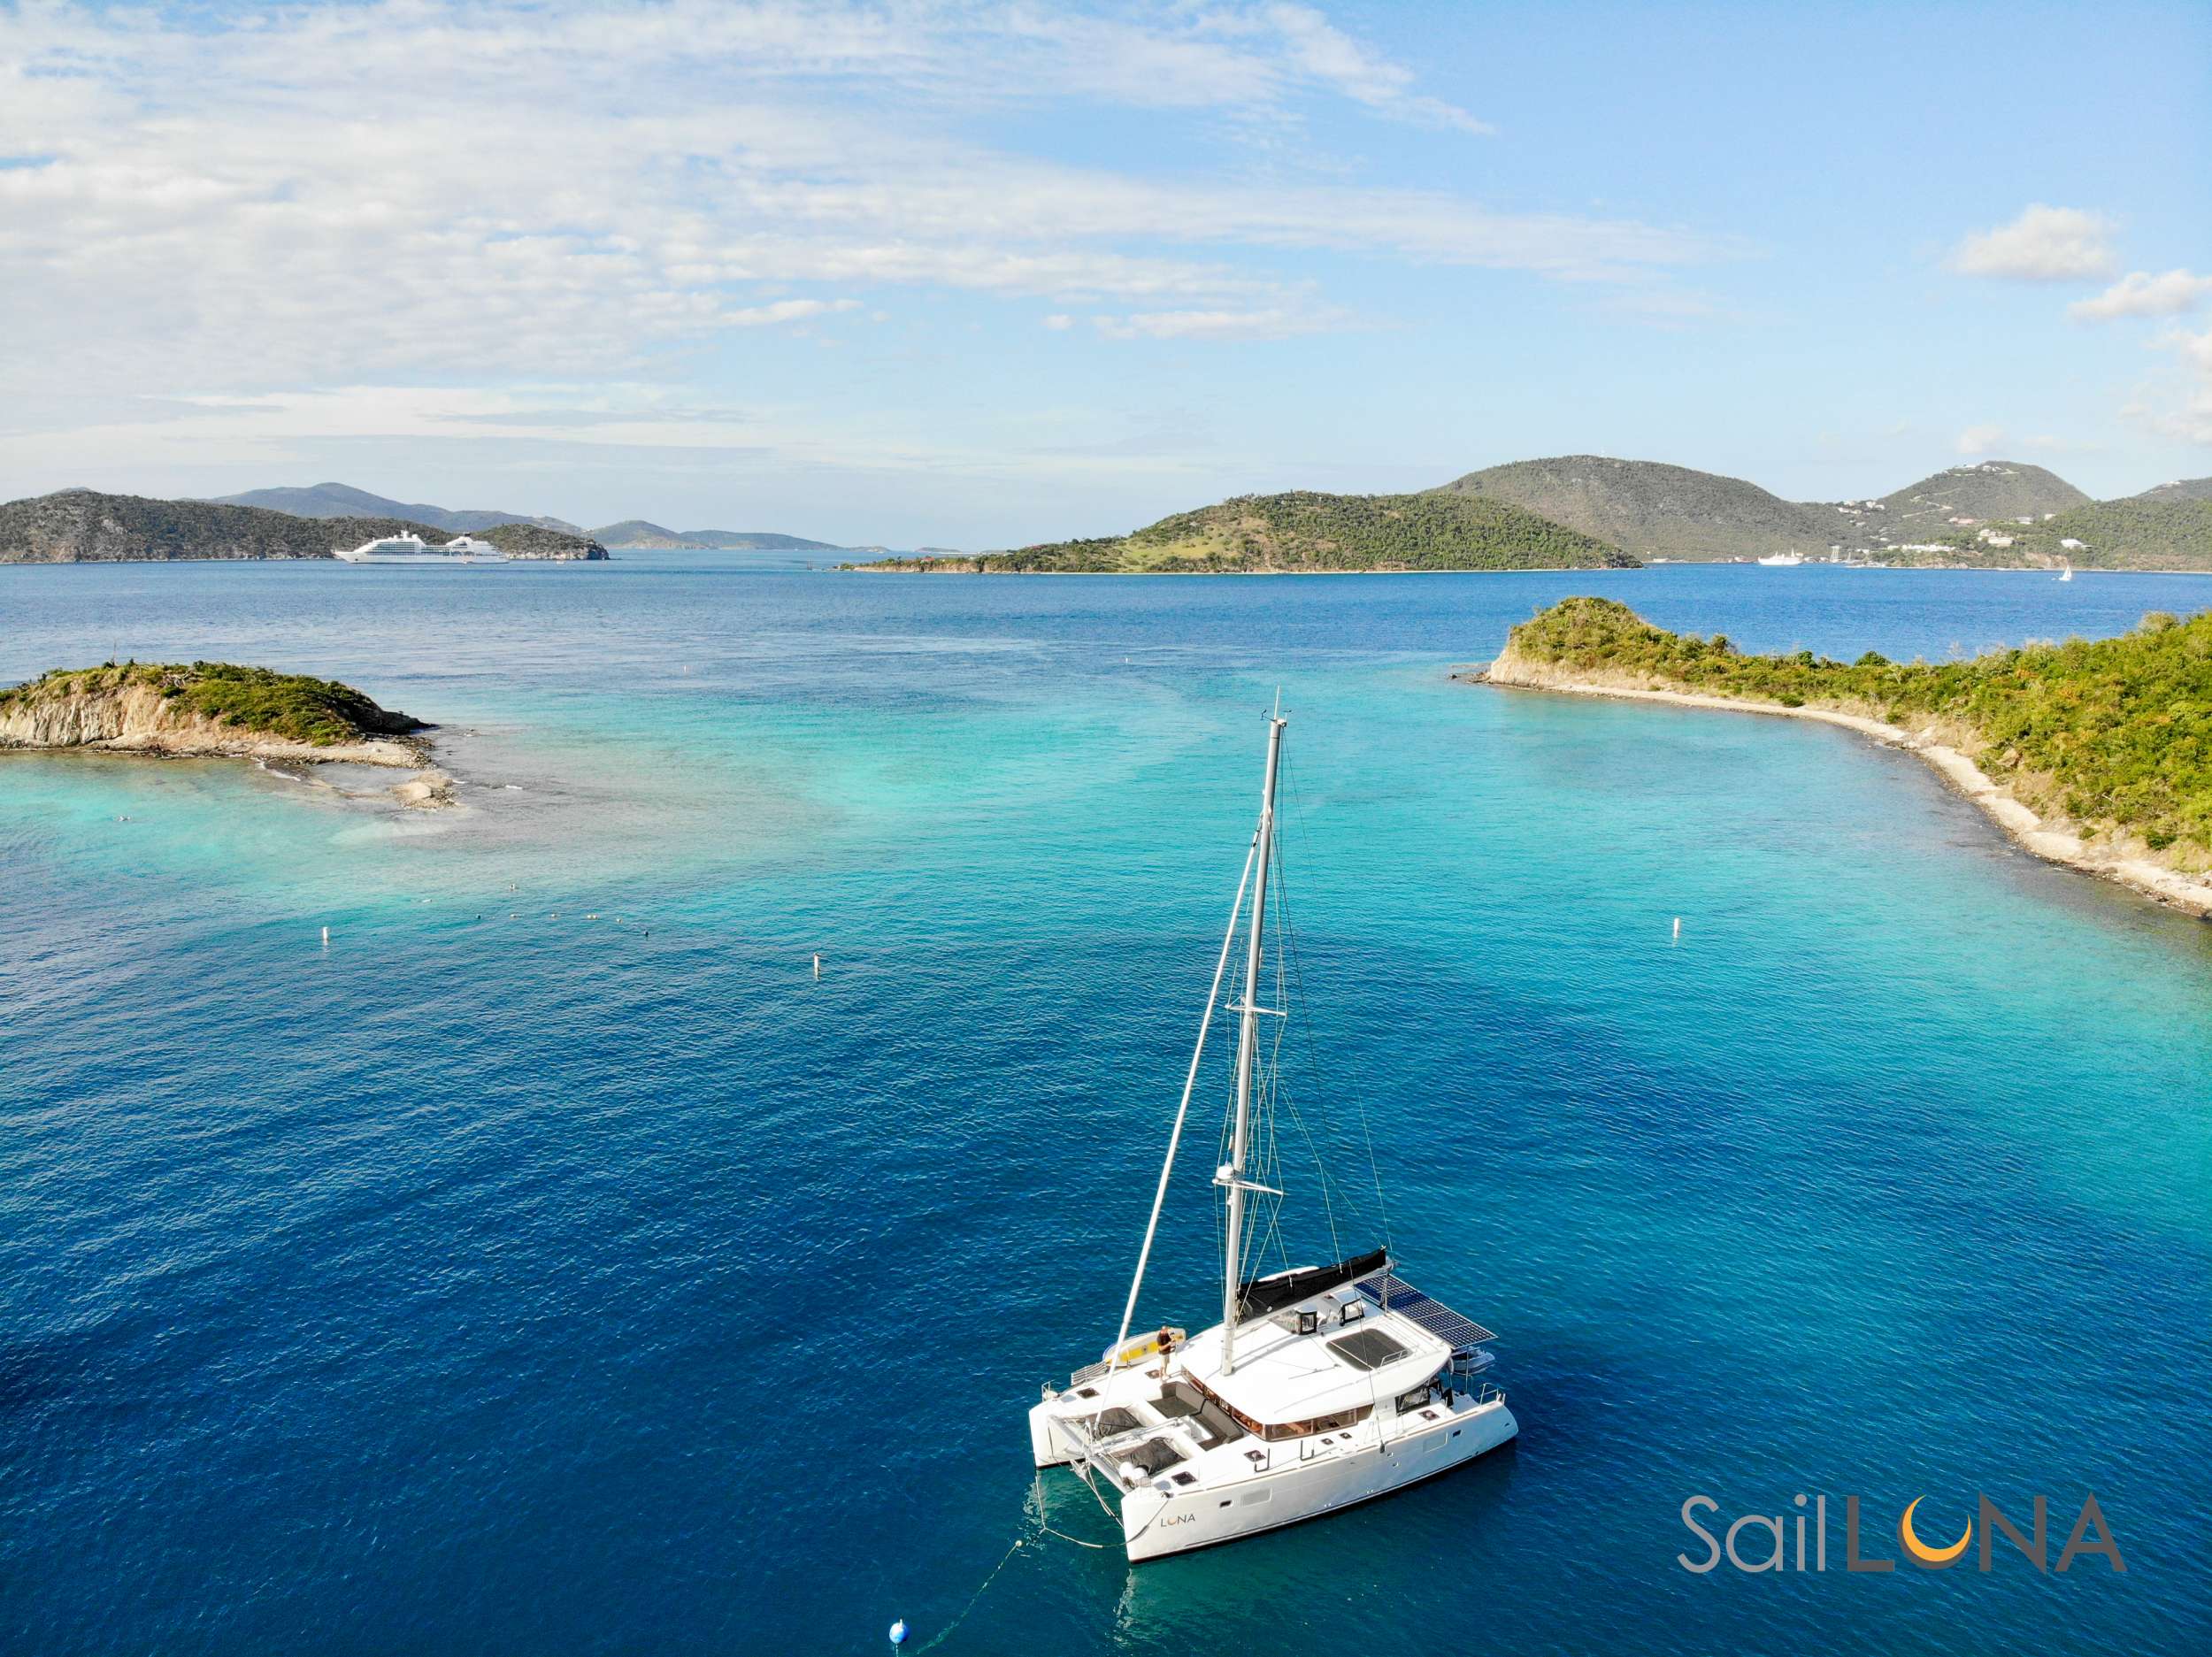 Come sail the Virgin Islands and find your own personal paradise aboard the elegant Luna. 

Join Captain Nim and Chef Fabiola for an island-hopping adventure on their brand-new, 45-foot luxury catamaran&mdash;a 2019 Lagoon 450S, custom-outfitted for added space and uncompromising comfort. 

Stretch out under the tropical sun on the spacious foredeck, dine al fresco at the 8-seater aft settee and lounge, or kick back in the breezy salon, where Luna&rsquo;s oversized windows give way to 360-degree sea views and abundant natural light. Three queen-sized staterooms provide spacious privacy for you and yours, while en-suite bathrooms with full-size showers and teak floors offer an uncommonly luxurious retreat.

Aboard Luna, every meal is a gourmet delight. Drawing from international influences and decades of experience, award-winning Chef Fabiola prepares locally sourced fare to your tastes, from challah French toast to chimichurri grilled steak and her award-winning fresh fish ceviche. Is it happy hour already? Ask Nim to shake up one of his specialty cocktails including gold-medal Limonana, and toast the good life on island time. 

You&rsquo;re at the helm of your custom-made Caribbean adventure when you step aboard Luna. Head ashore for local bites and barefoot bars, or seek out quiet coves of unparalleled beauty. Swim amid sea turtles and schooling fish on guided snorkeling outings with Captain Nim, soak up the sun below wind-filled sails, sip hand-crafted cocktails under shimmering starlight, and drift off to a blissful sleep along gentle waves.

Experience the Virgin Islands with the utmost in good food and good times. Welcome aboard Luna. 